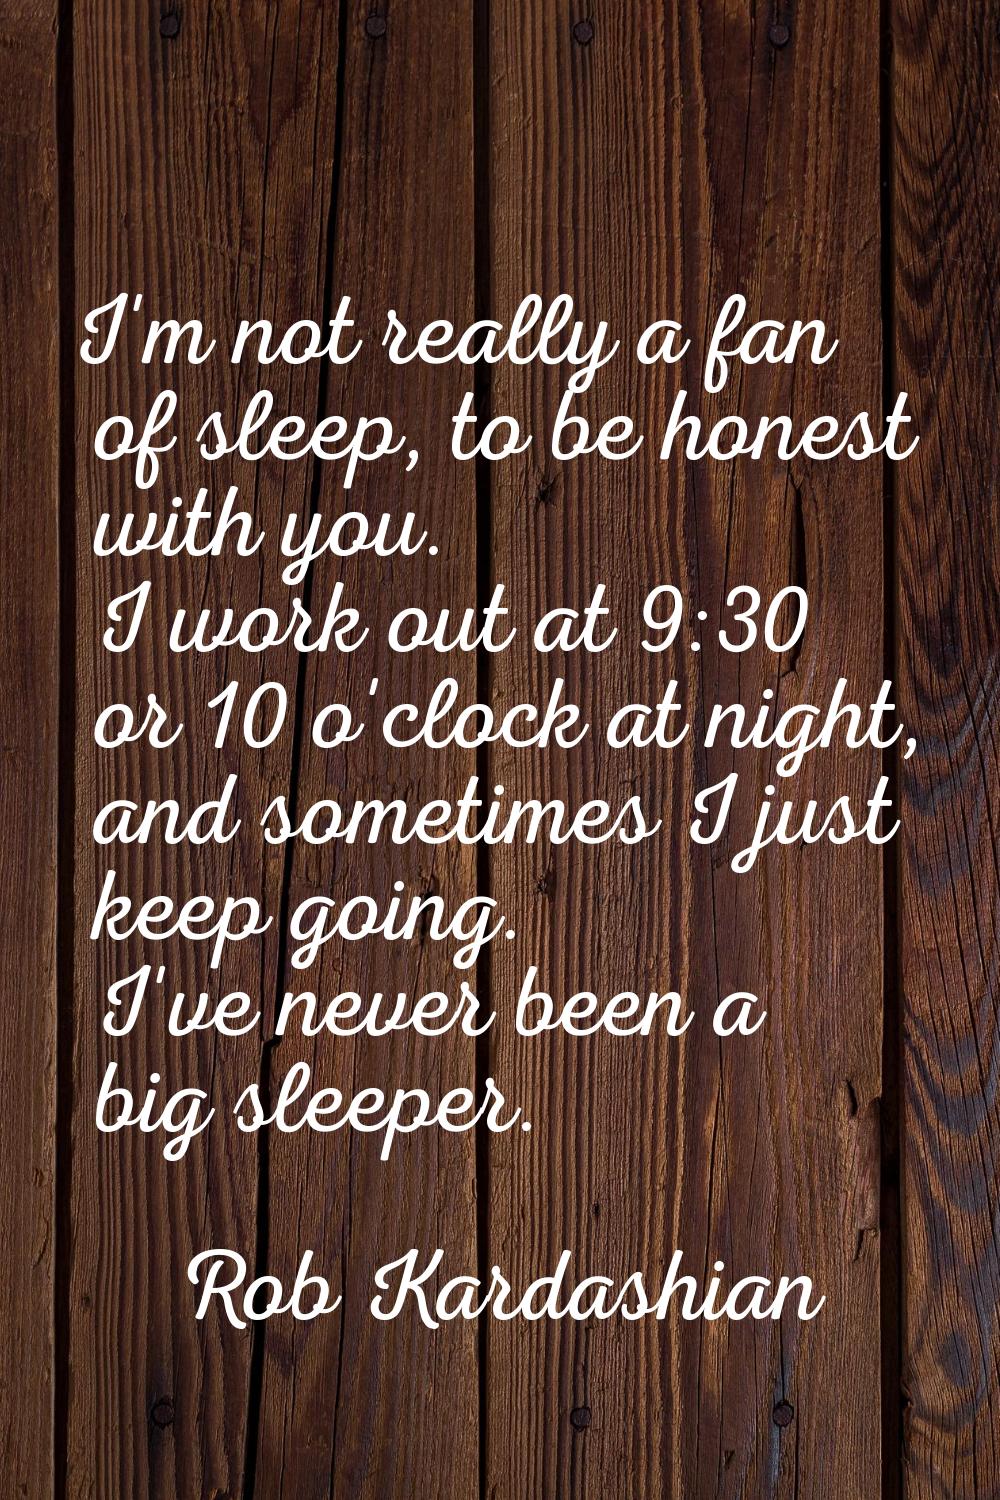 I'm not really a fan of sleep, to be honest with you. I work out at 9:30 or 10 o'clock at night, an